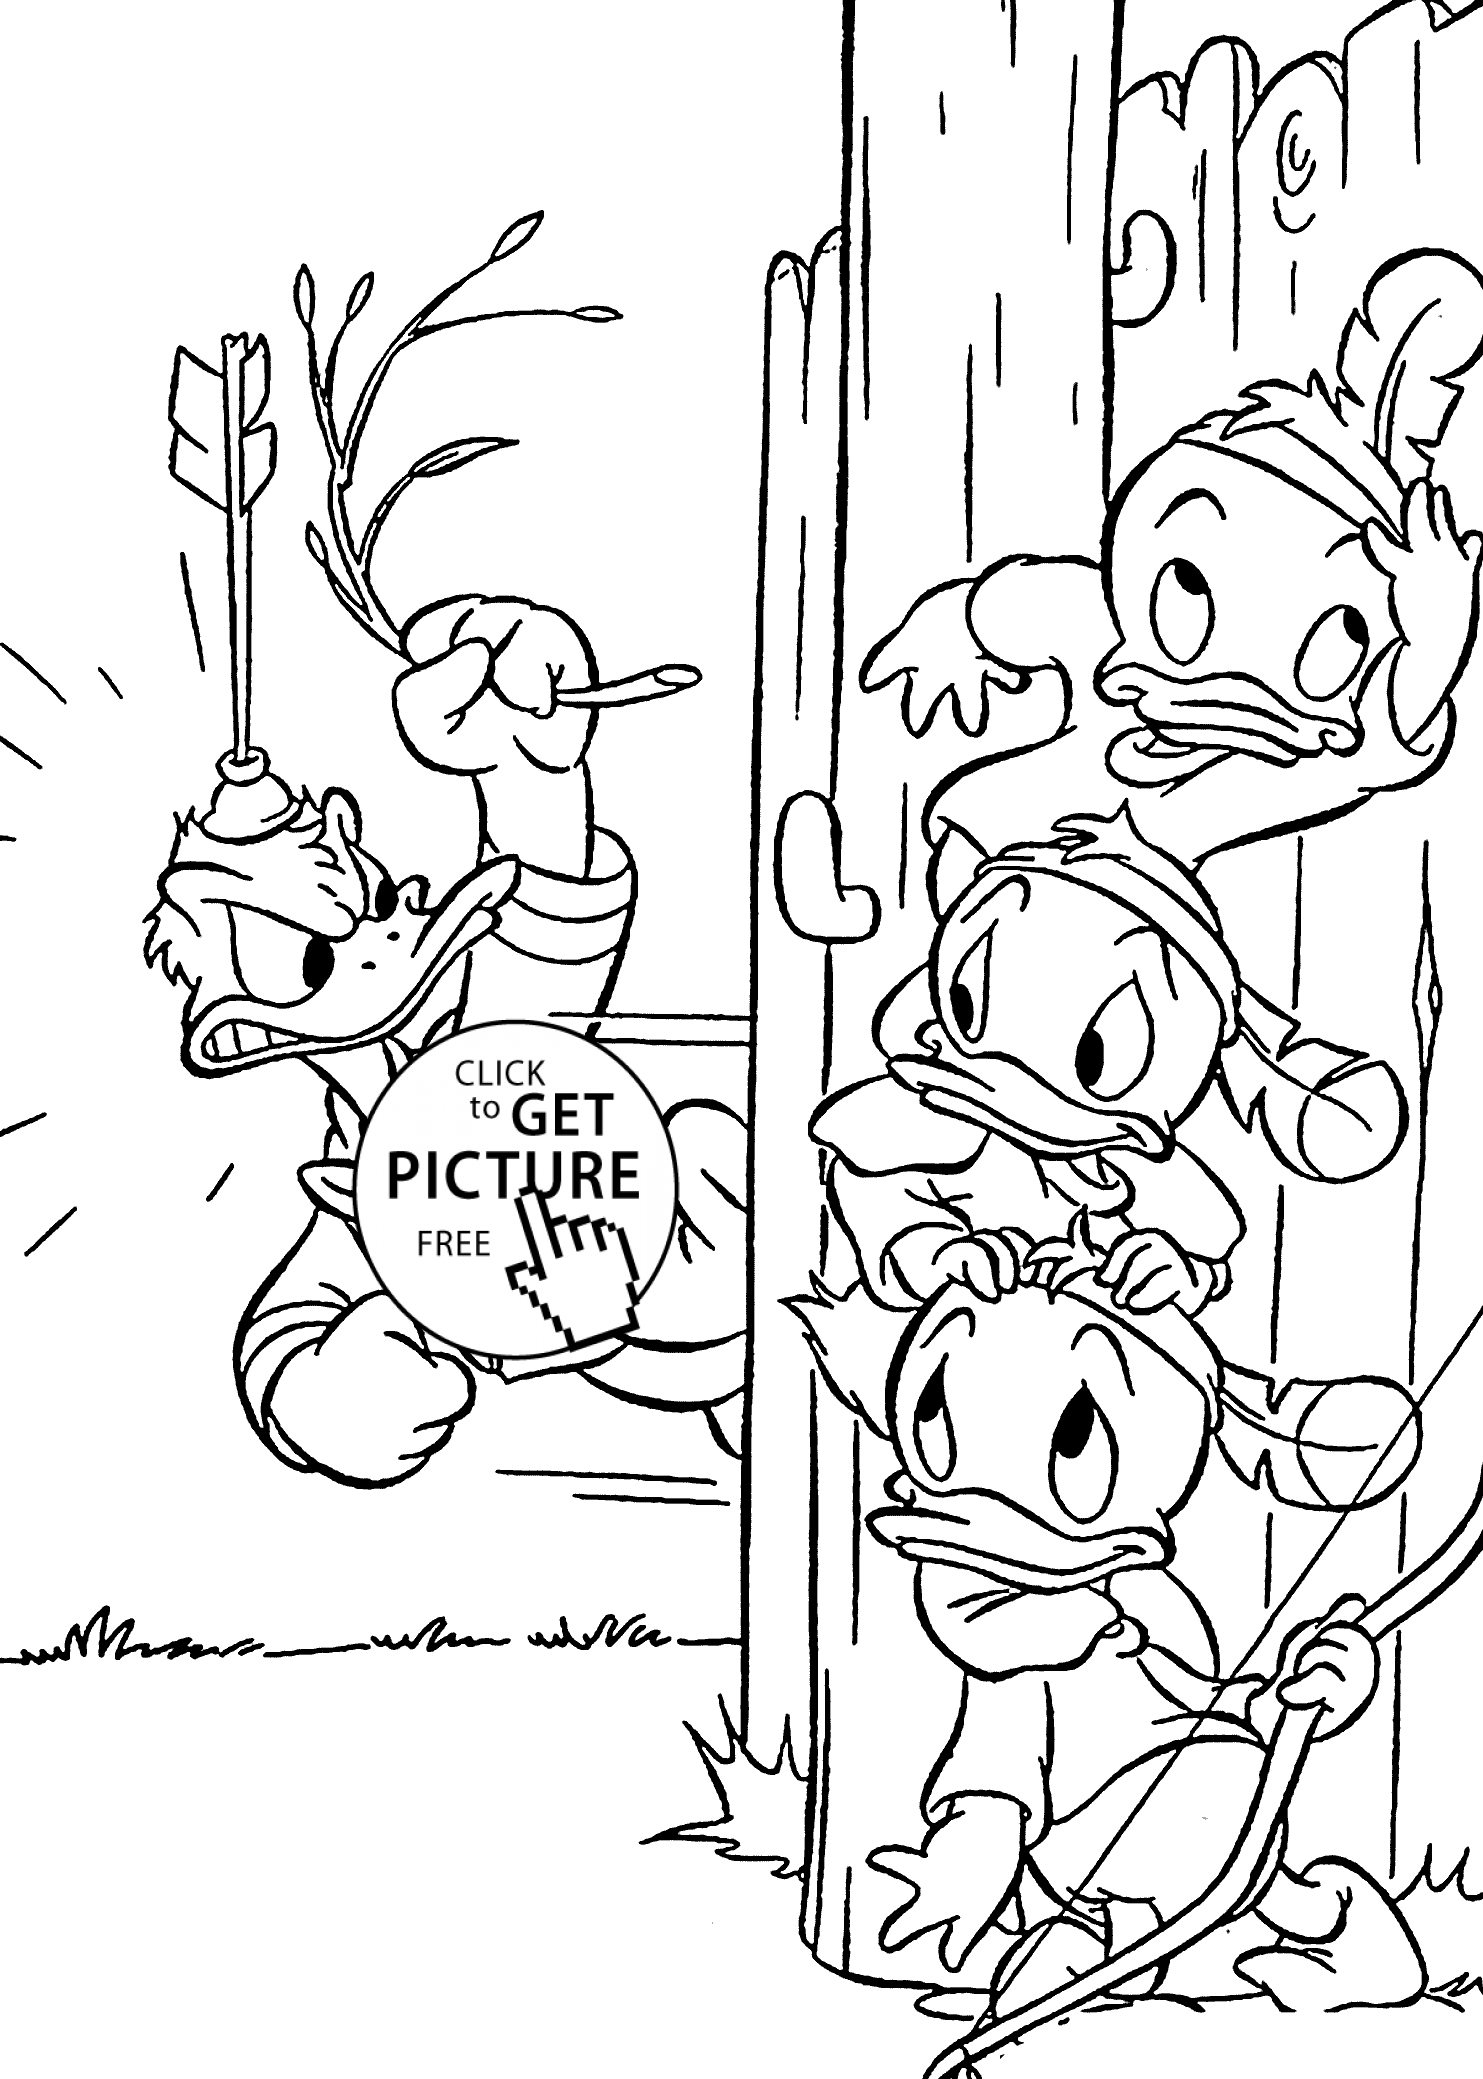 Duck tales Indians coloring pages for kids, printable free